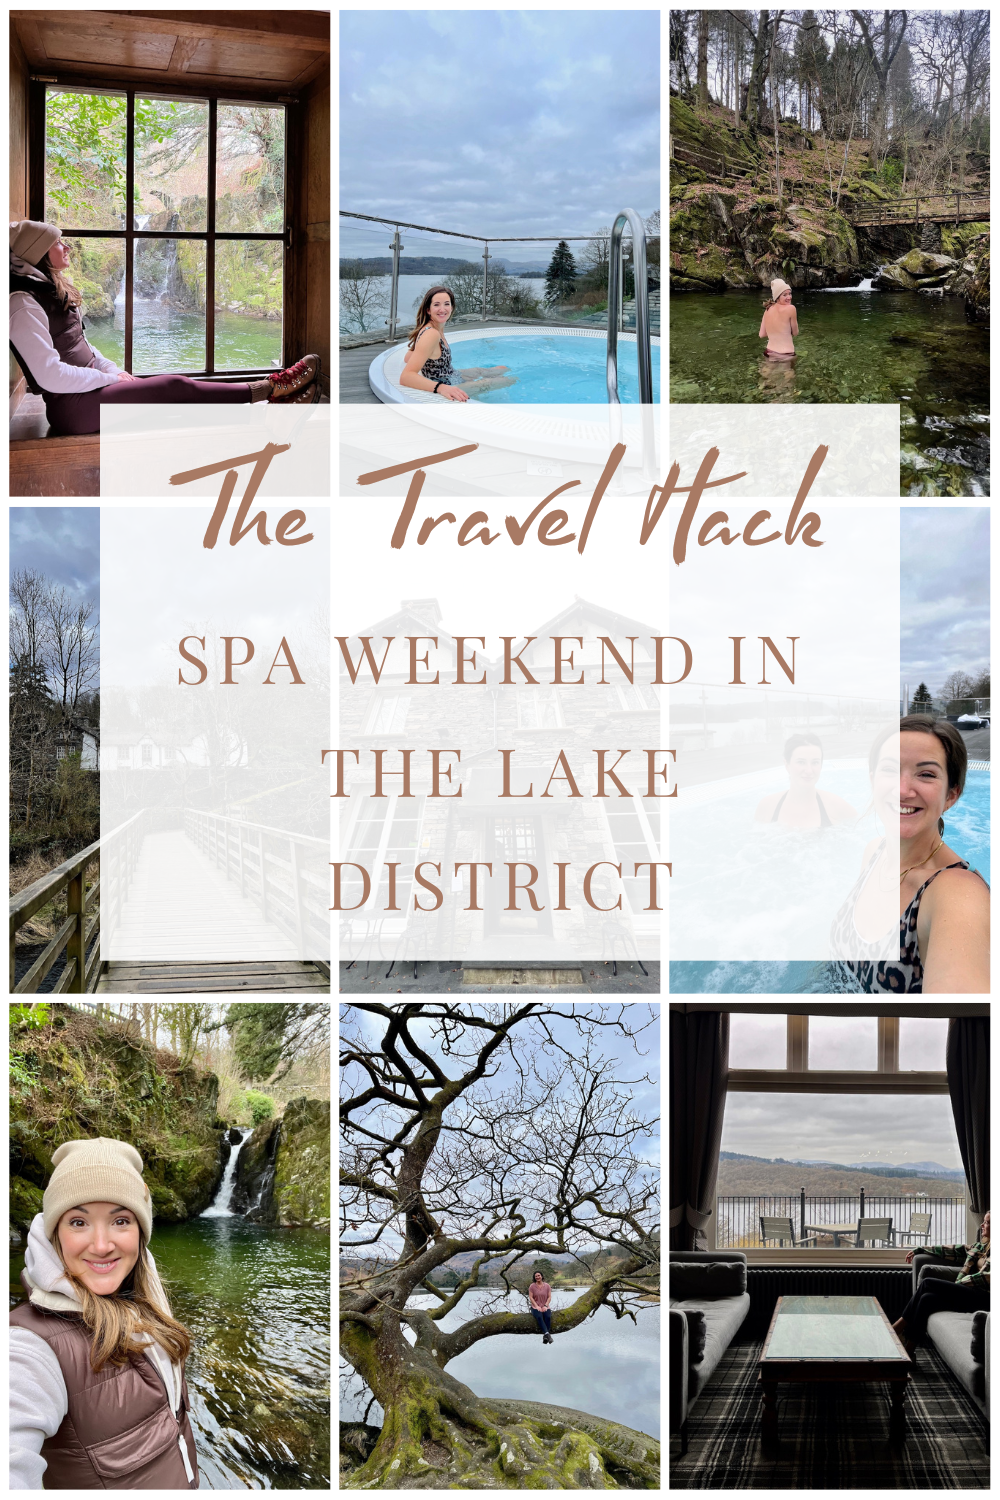 The perfect spa weekend in the Lake District